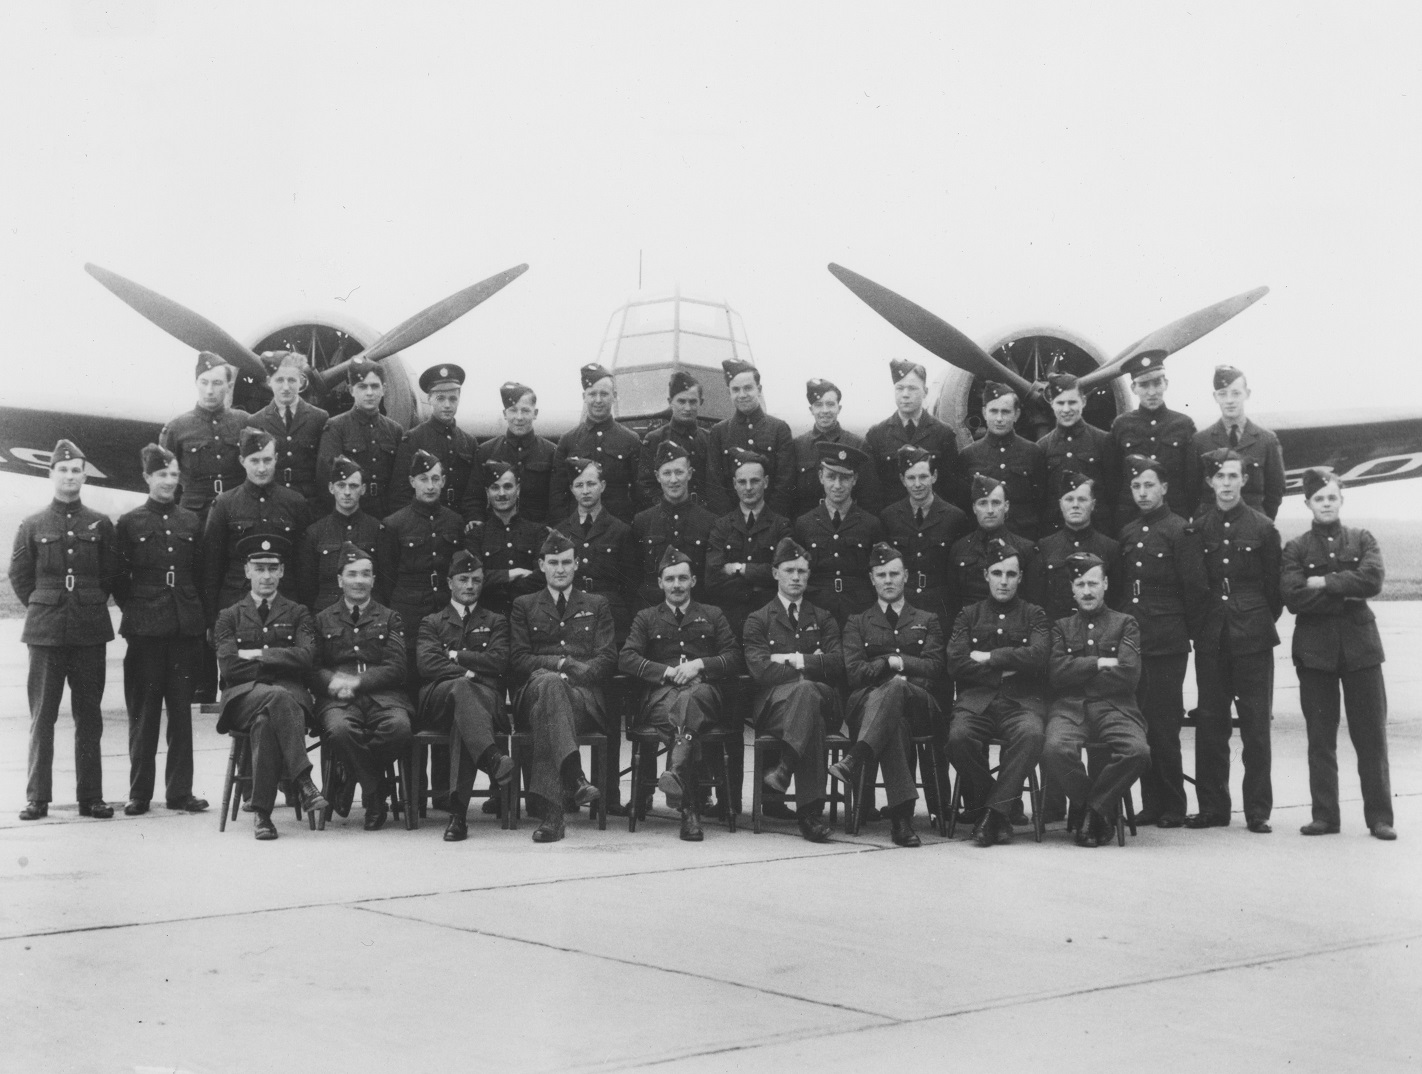 Black and white image shows RAF squadron group photo in front of an aircraft.